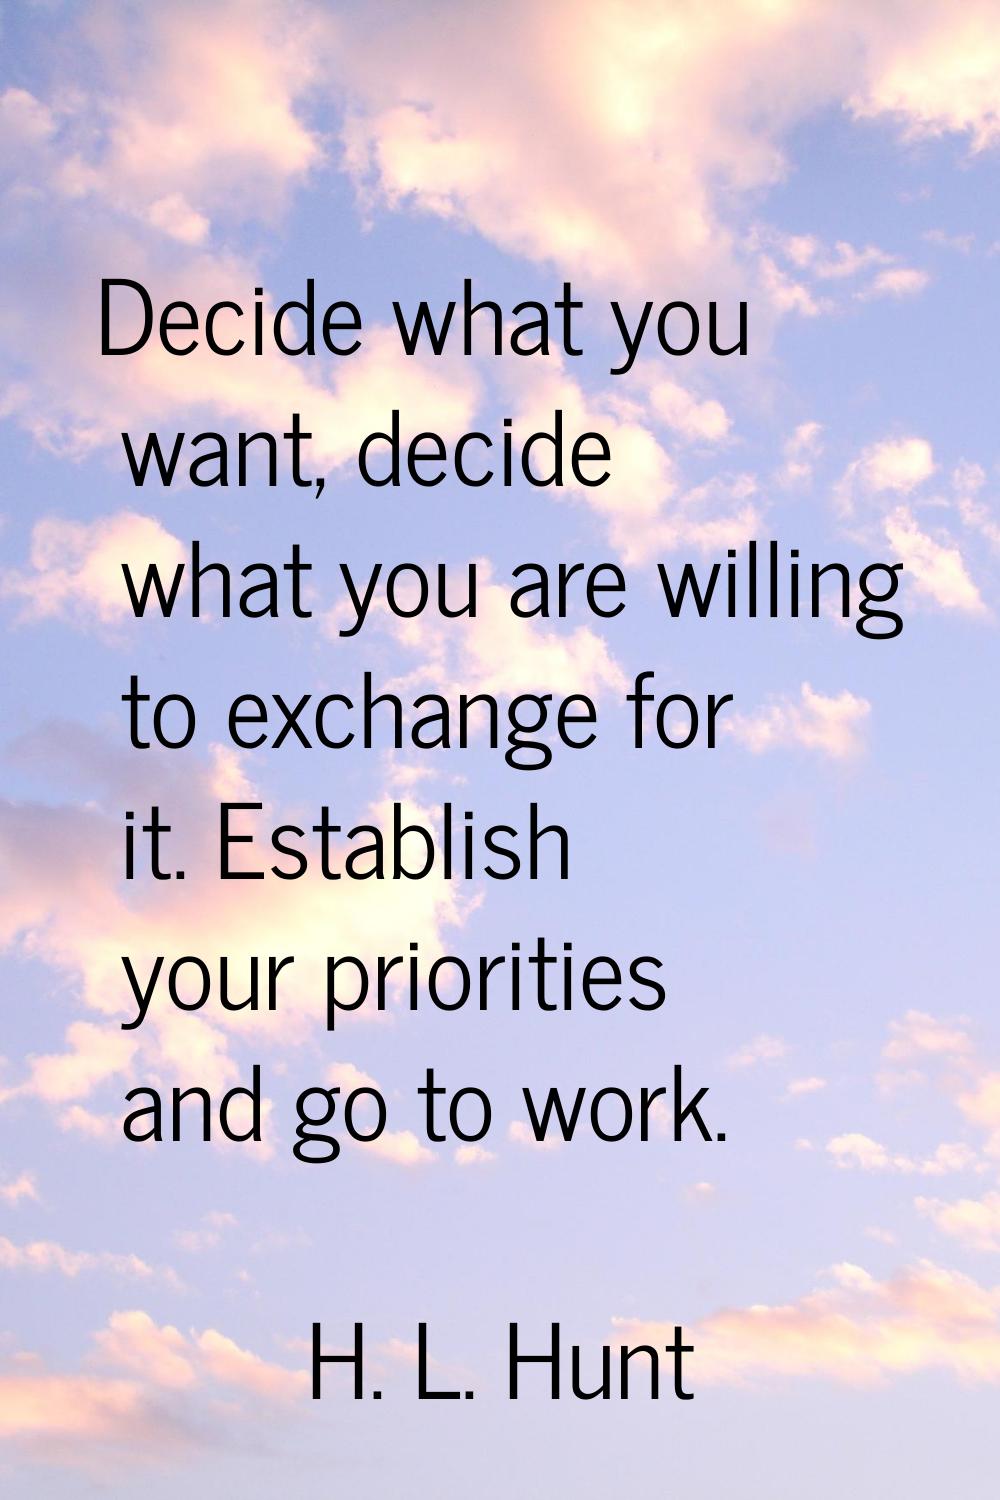 Decide what you want, decide what you are willing to exchange for it. Establish your priorities and